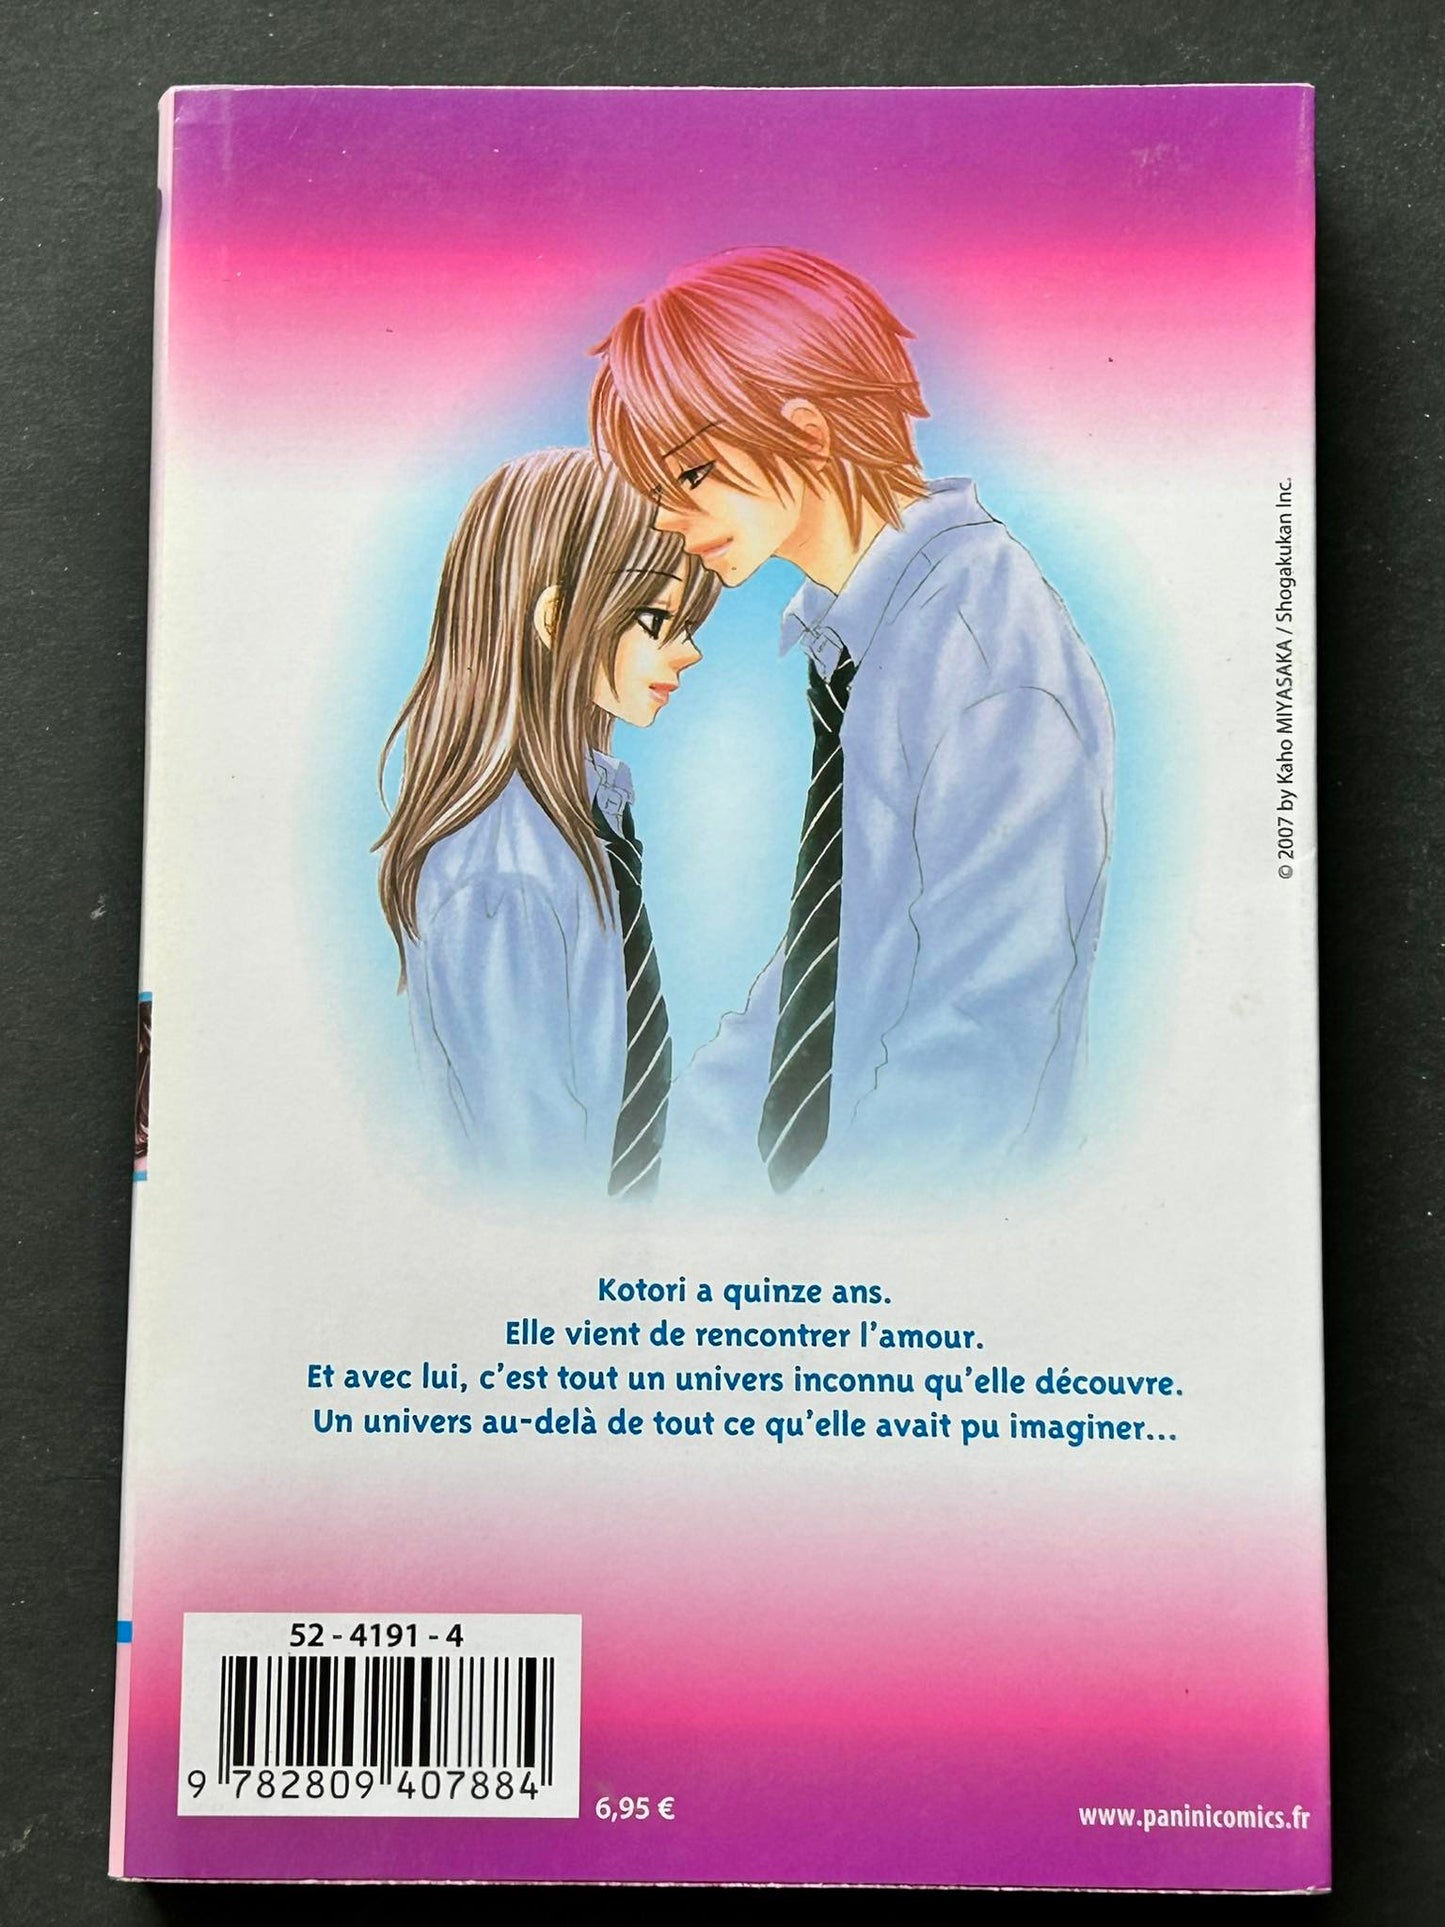 A romantic love story, tome 1